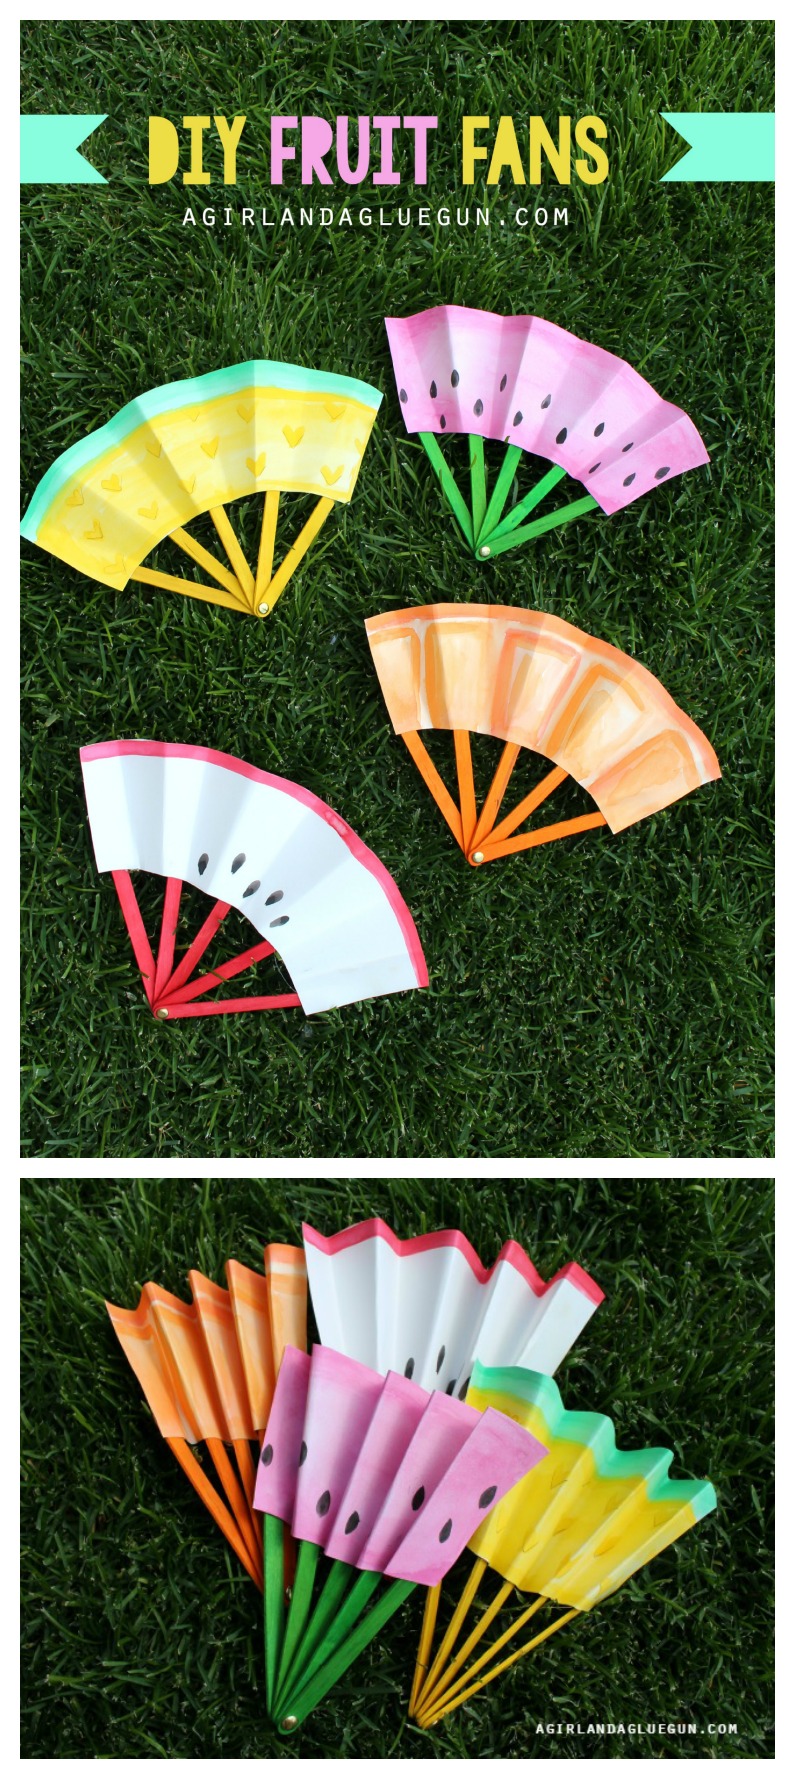 Diy Fruit Fan Crafts With Painted Paper And Popsicle Sticks A Useful